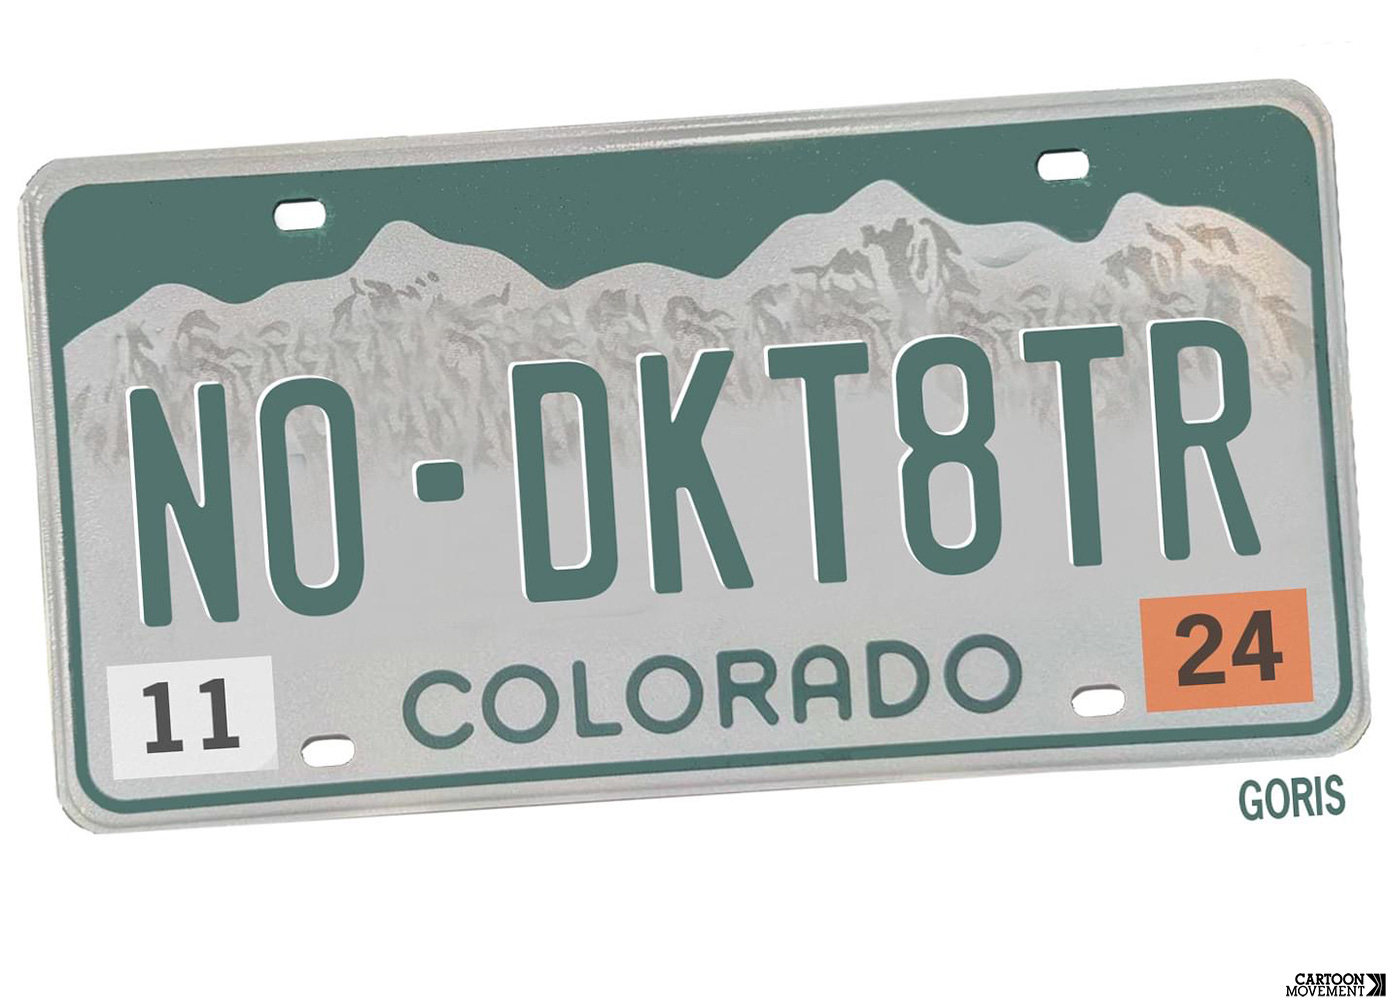 Cartoon showing a Colorado license plate that reads 'N0 DKT8TR'